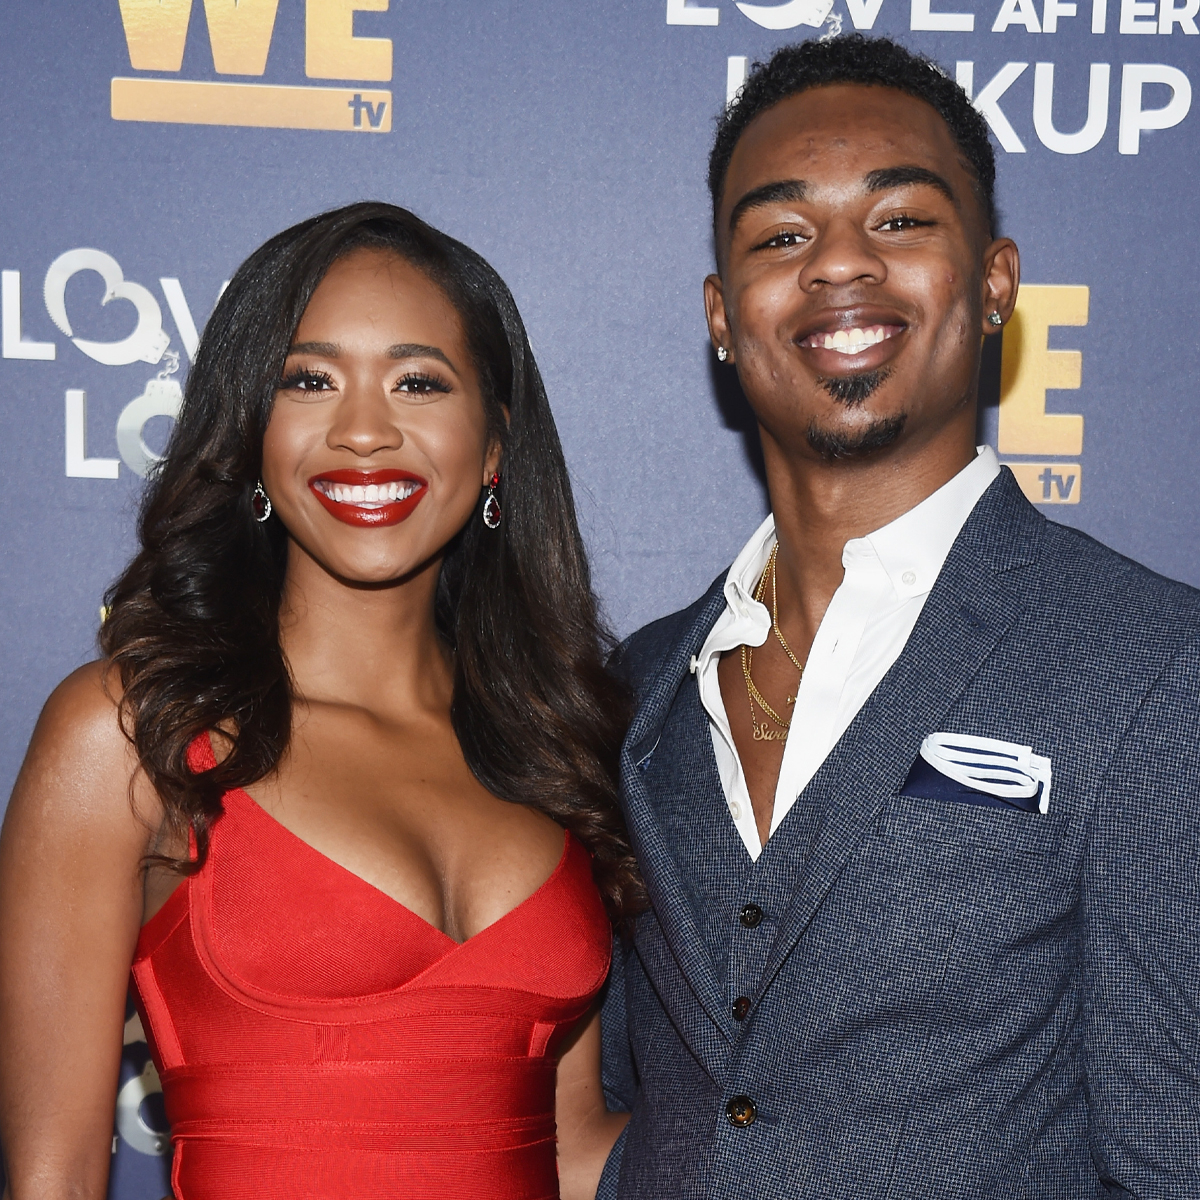 Big Brother’s Bayleigh and Swaggy C Announce Pregnancy